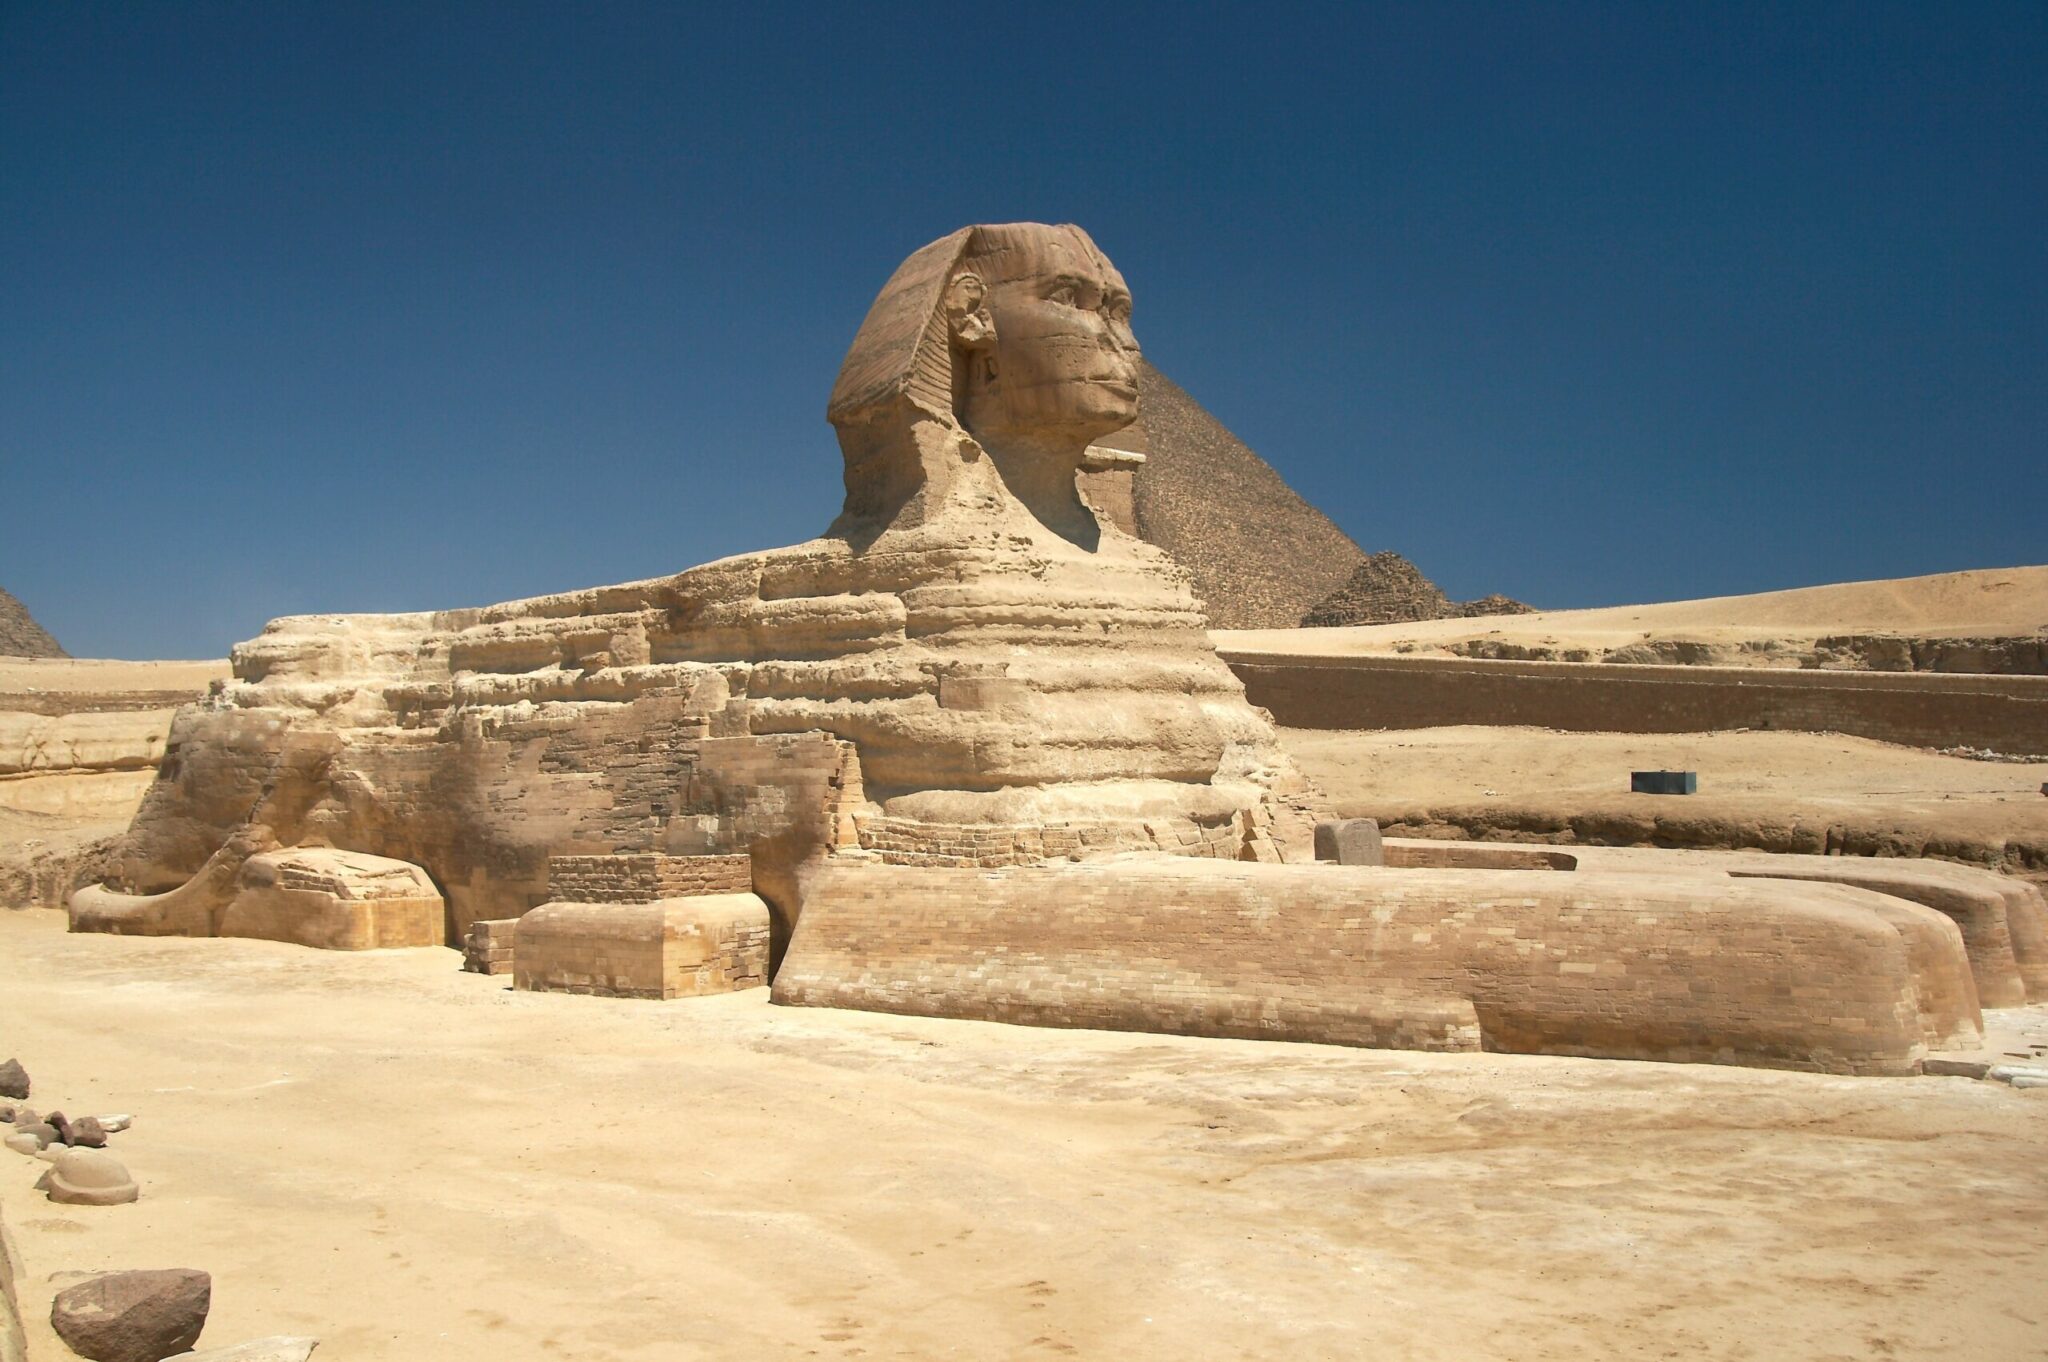 where does the name sphinx come from and what does the word sphinx mean in greek scaled